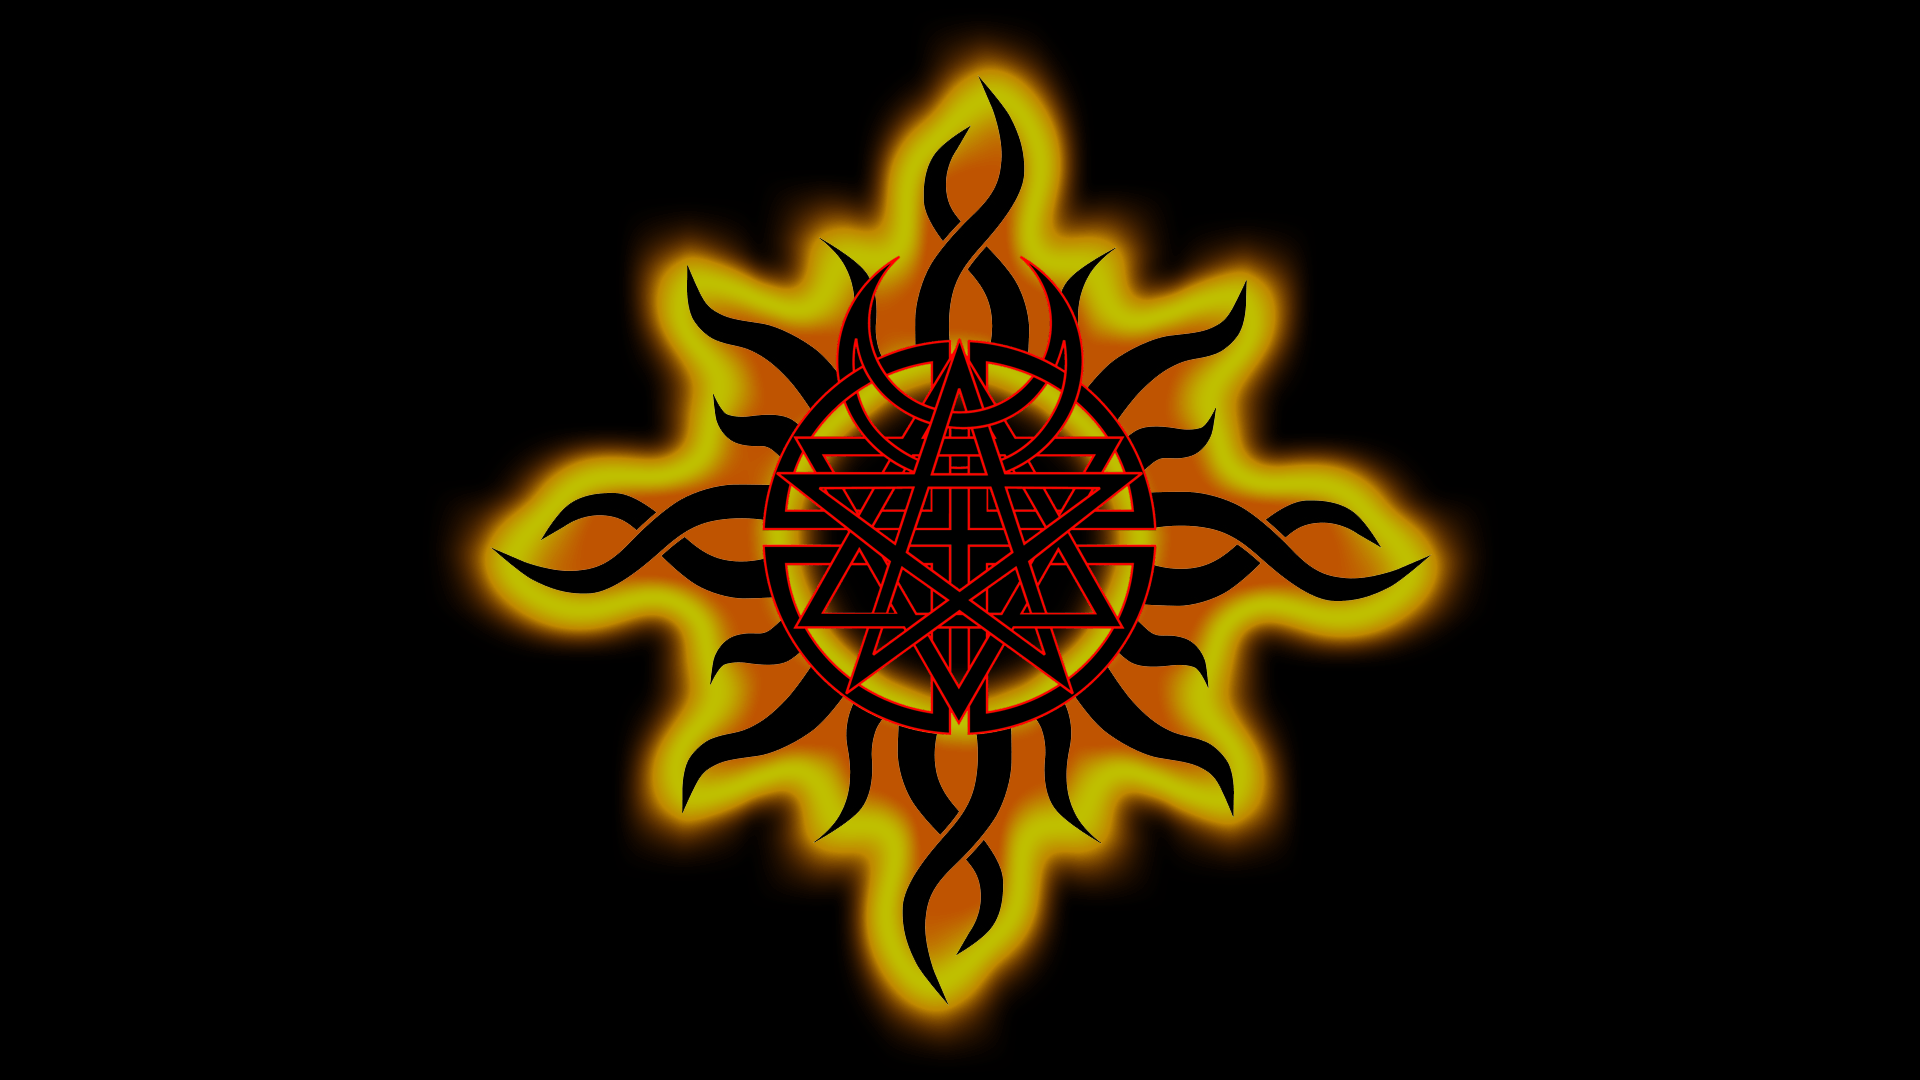 Godsmack Wallpapers Click To View Pictures